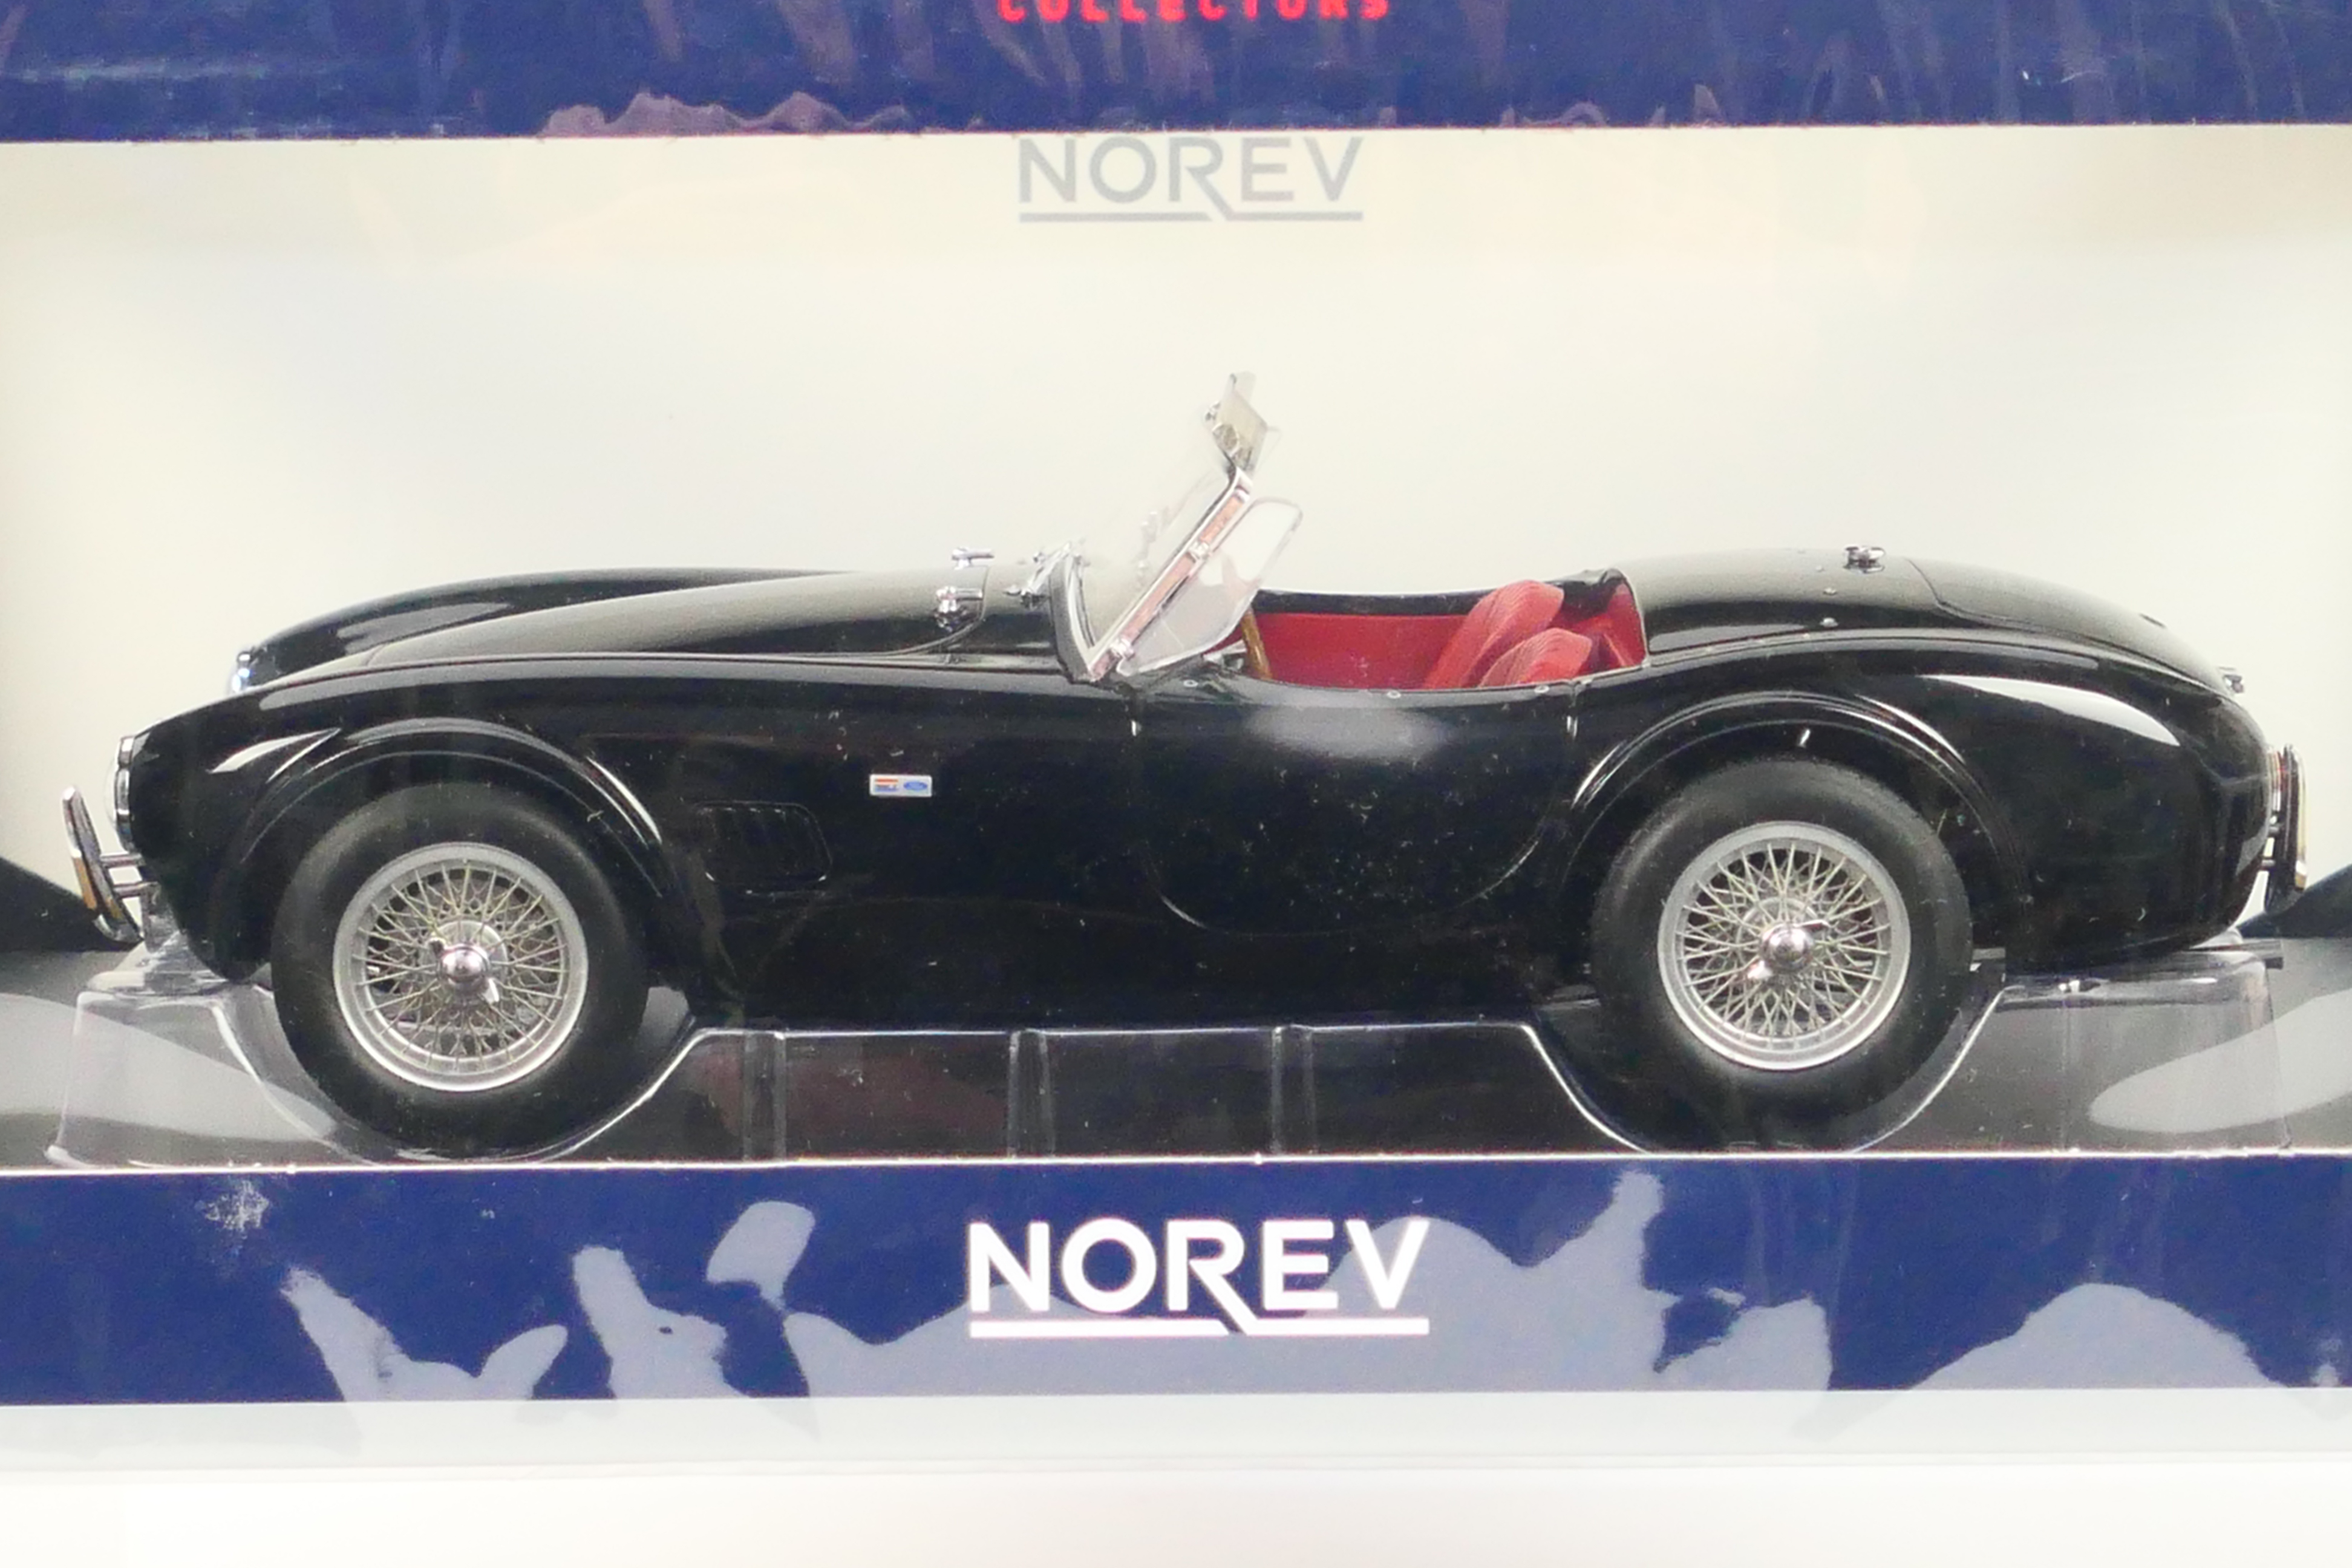 Norev - A boxed Norev #182754 1:18 scale AC Cobra 289 1963. - Image 2 of 4